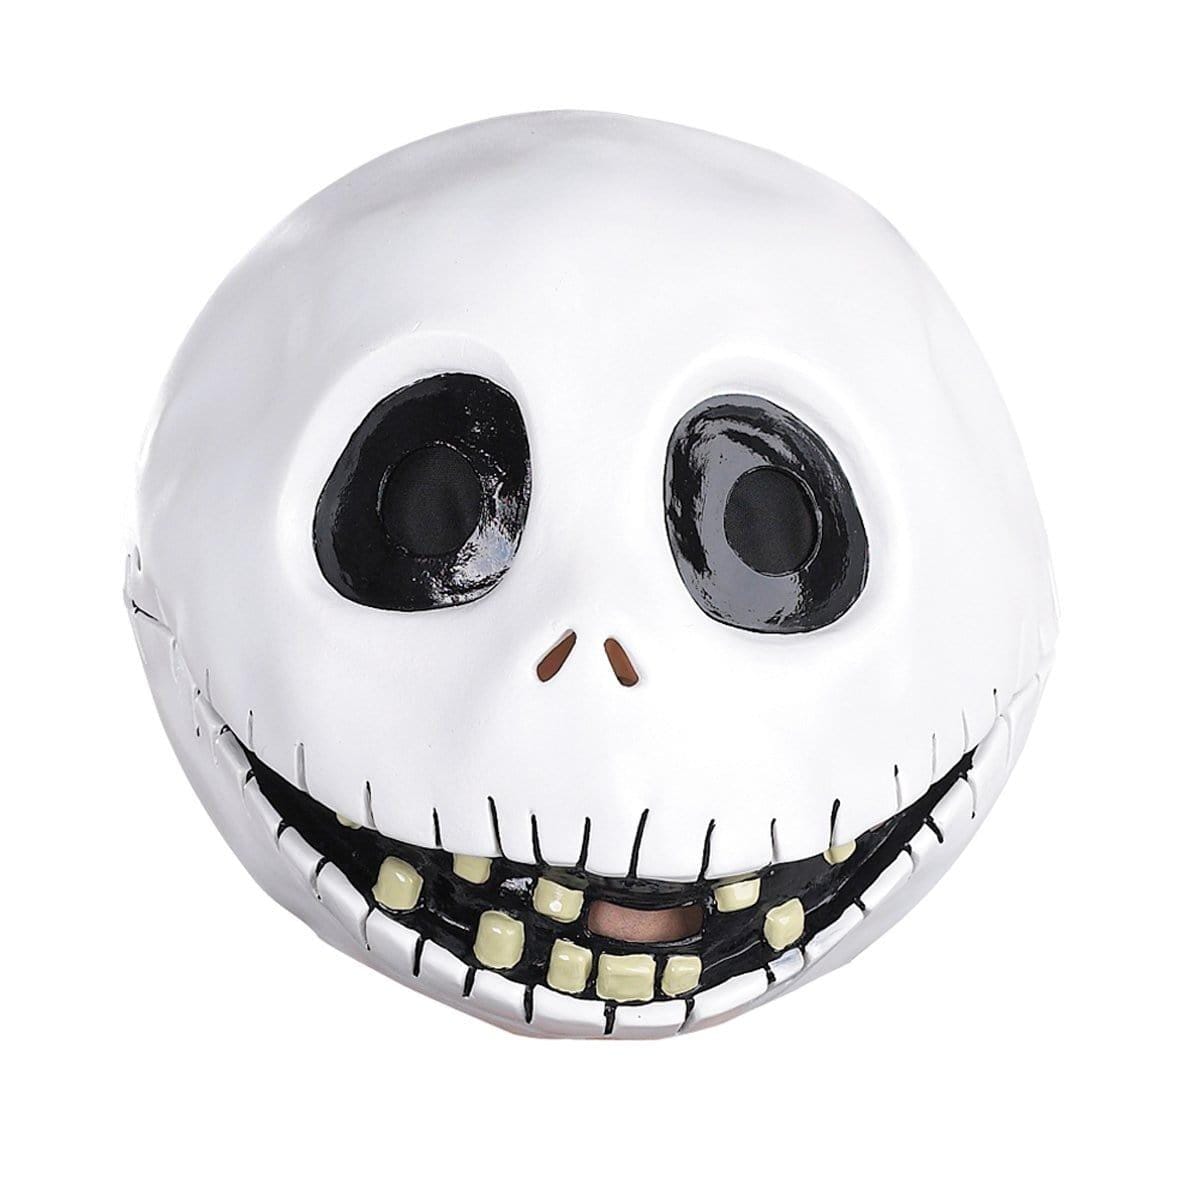 Buy Costume Accessories Jack Skellington mask, Nightmare Before Christmas sold at Party Expert